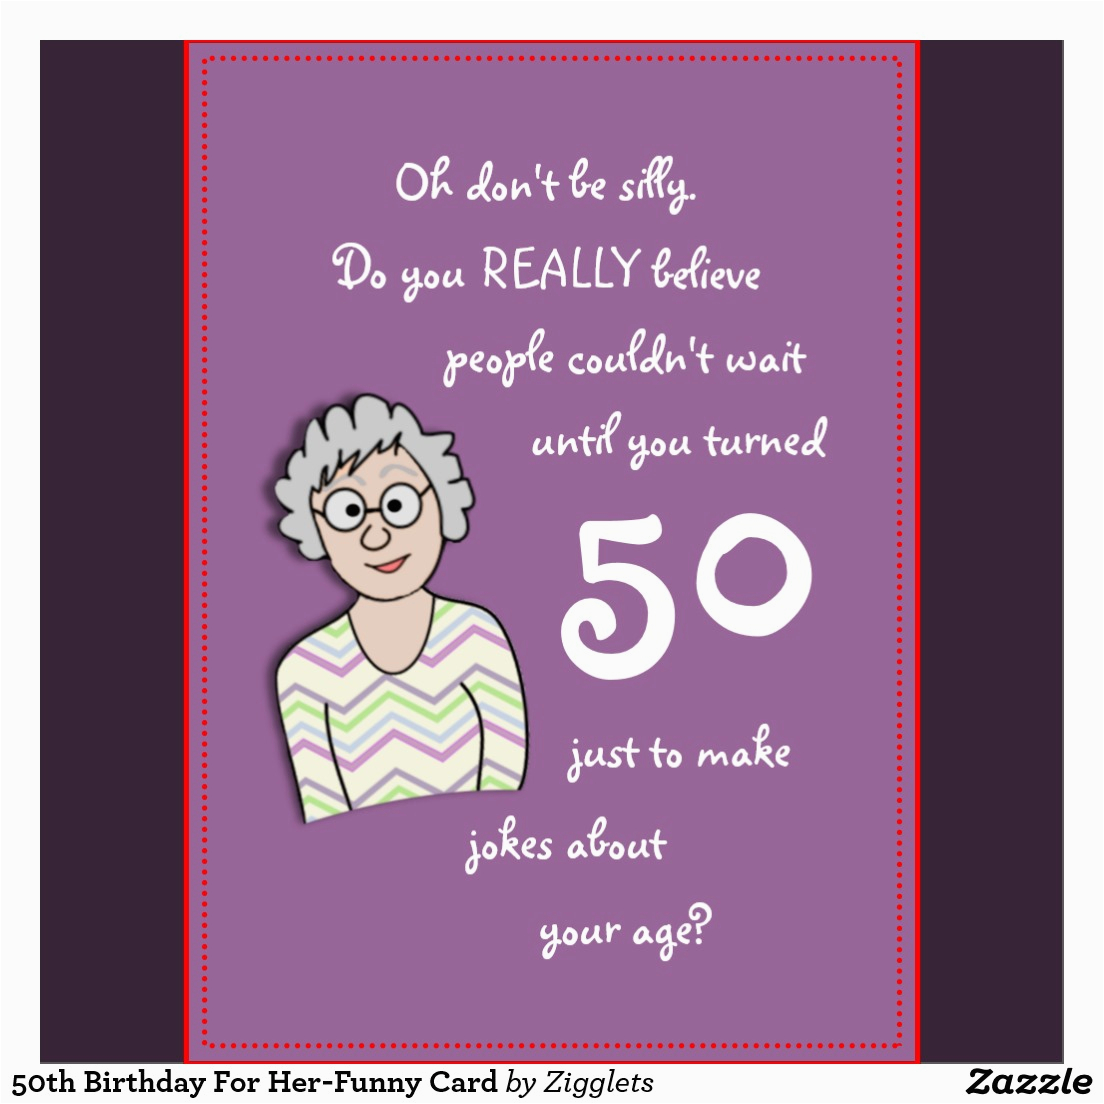 50th birthday quotes funny